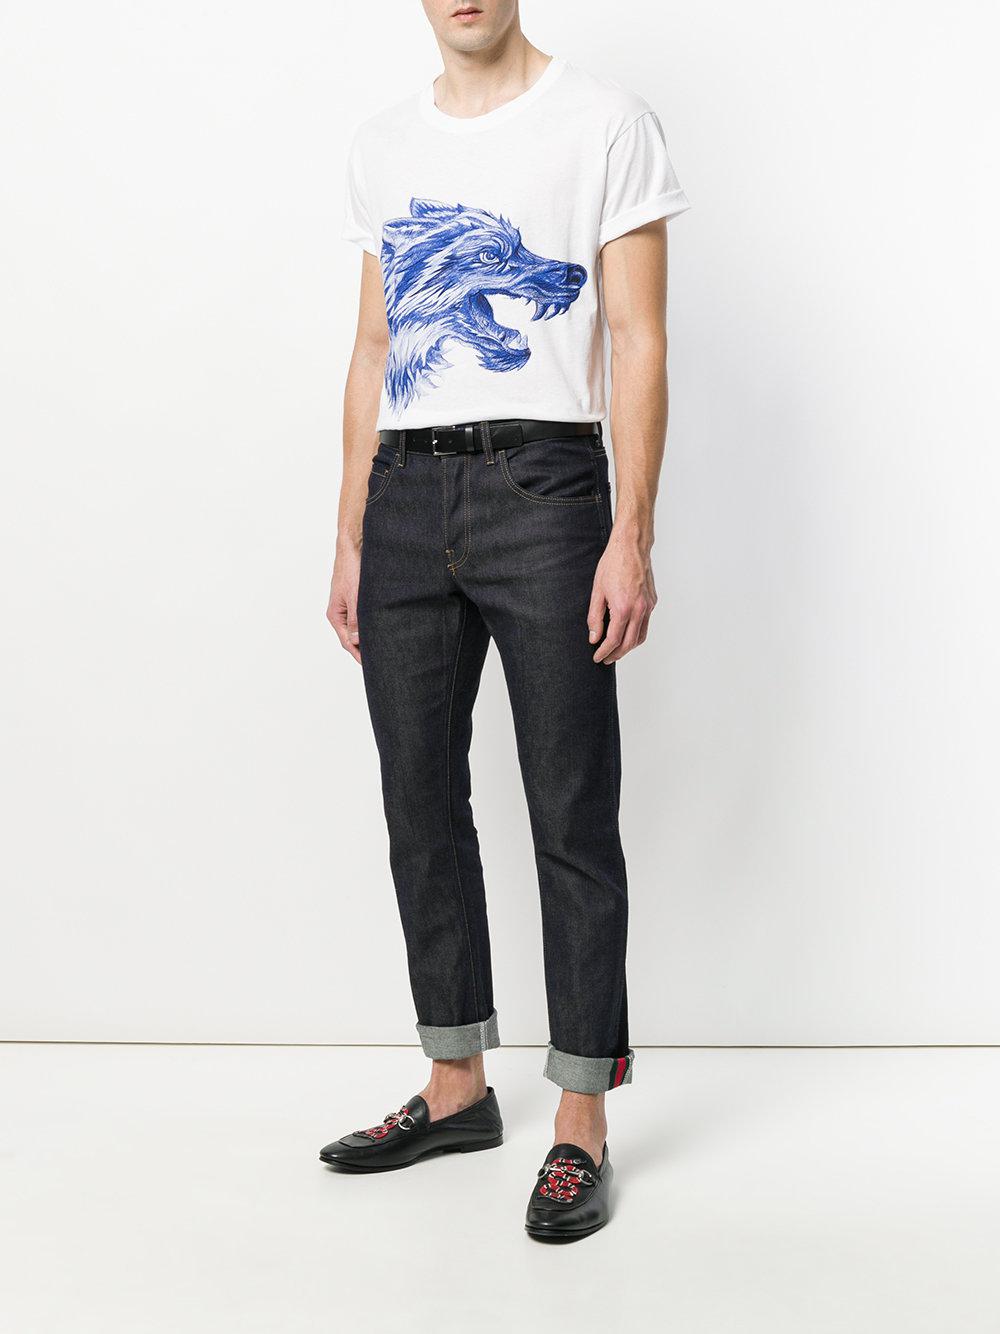 Gucci Wolf Print T-shirt in White for Men - Lyst